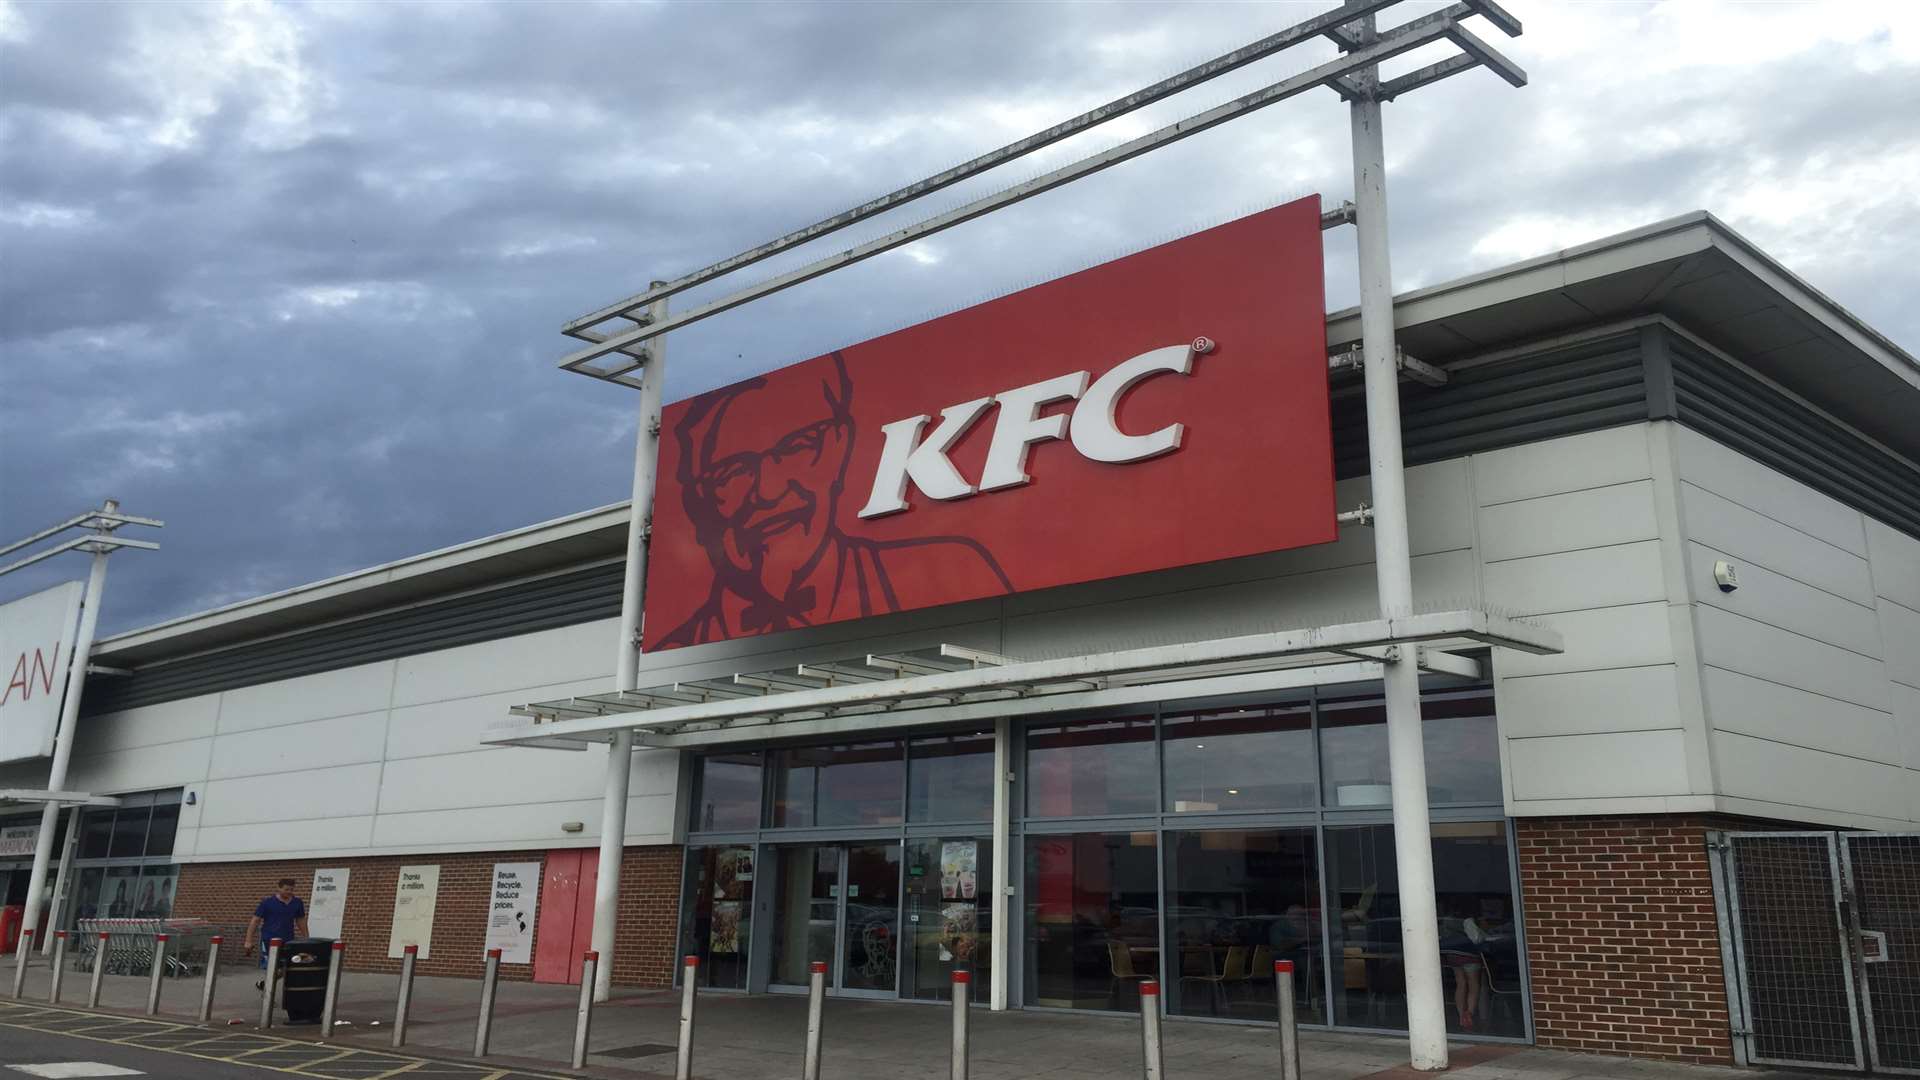 KFC at Strood Retail Park in Commercial Road